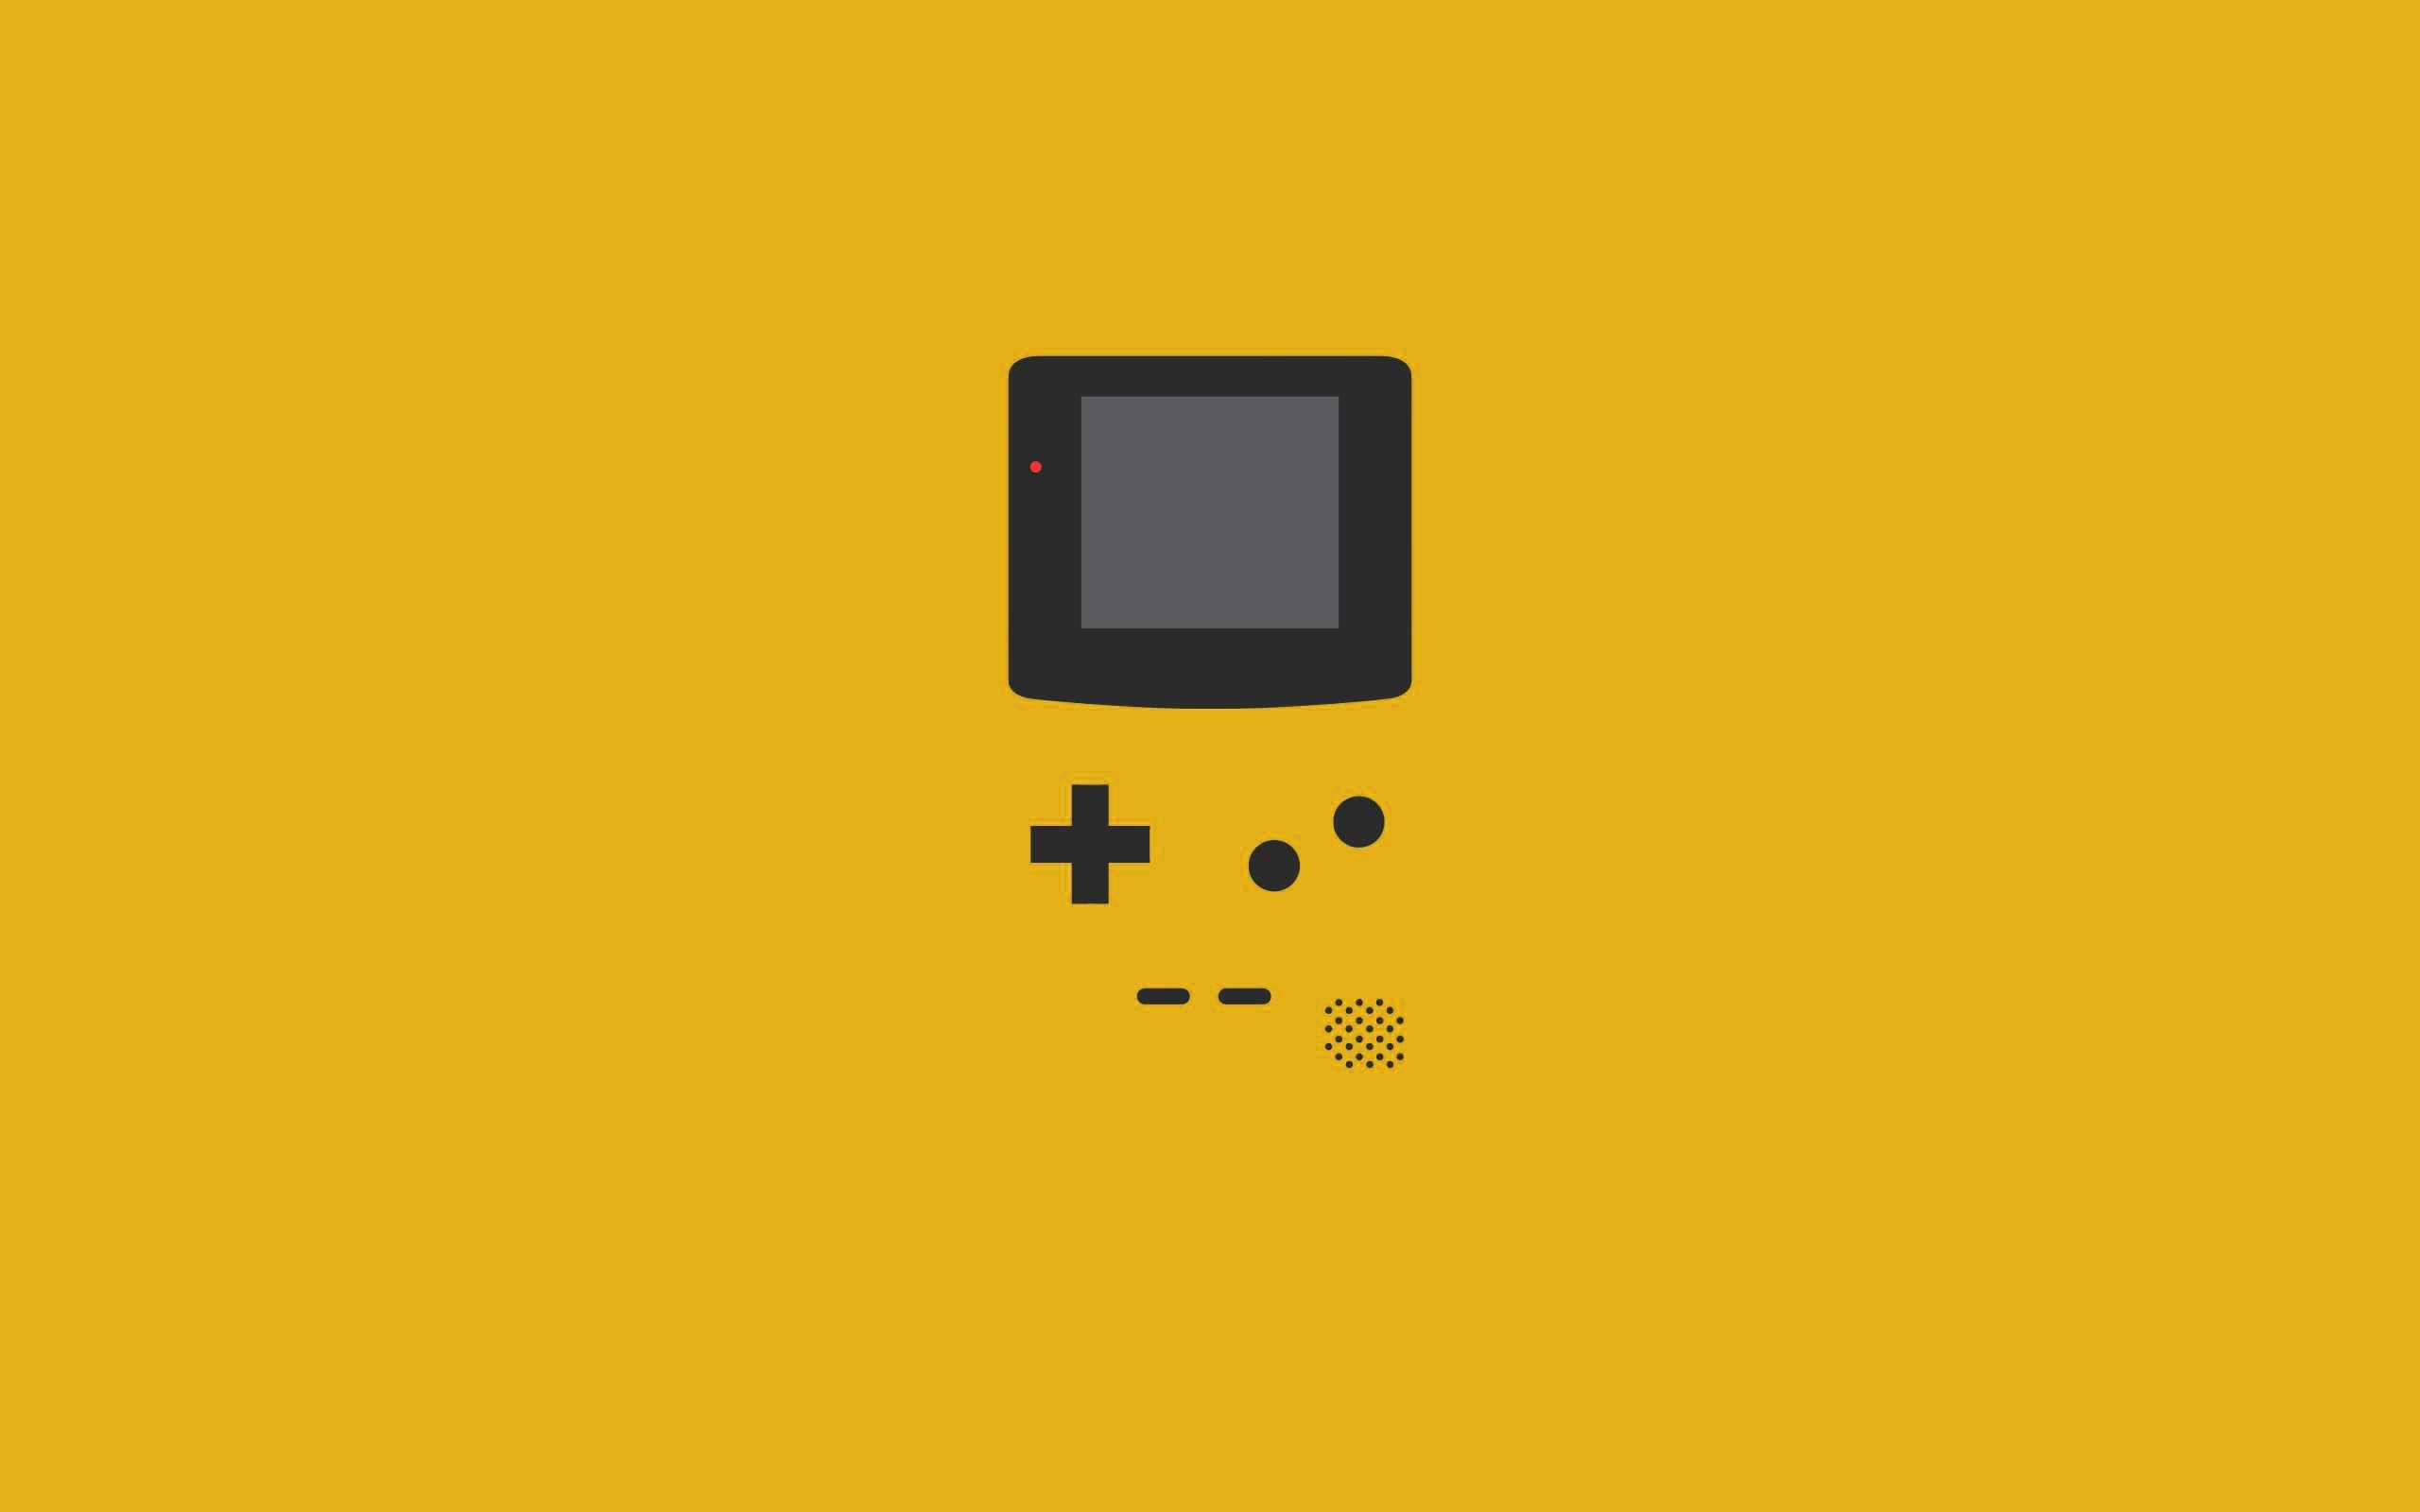 Wallpaper, minimalism, text, yellow, technology, brand, GameBoy, icon, line, 2560x1600 px, computer wallpaper, font, product design 2560x1600